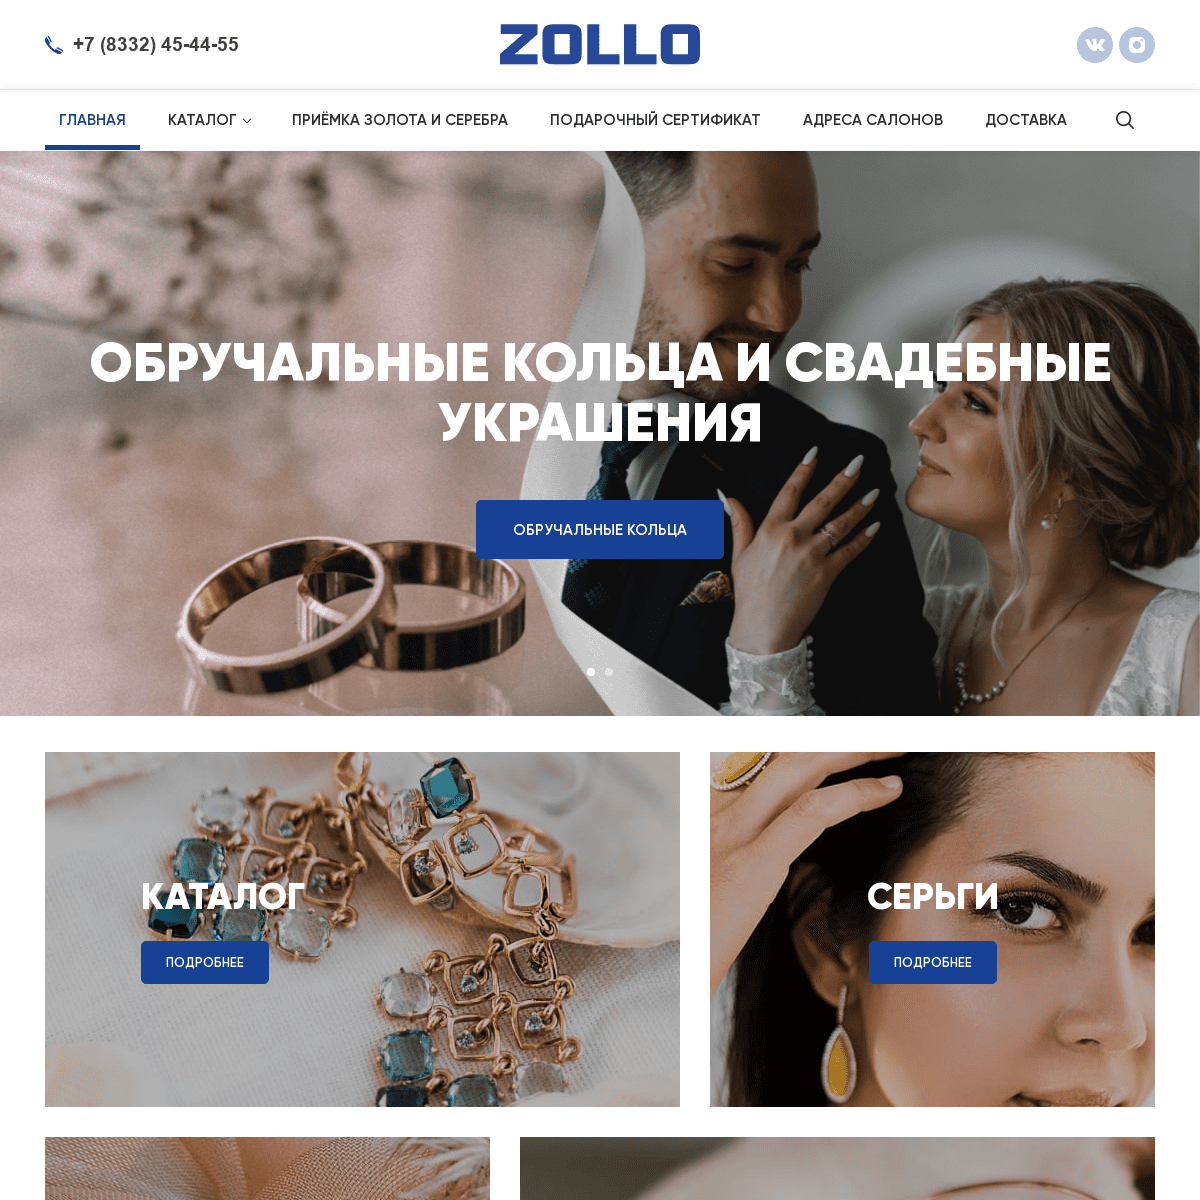 A complete backup of https://zollo.ru